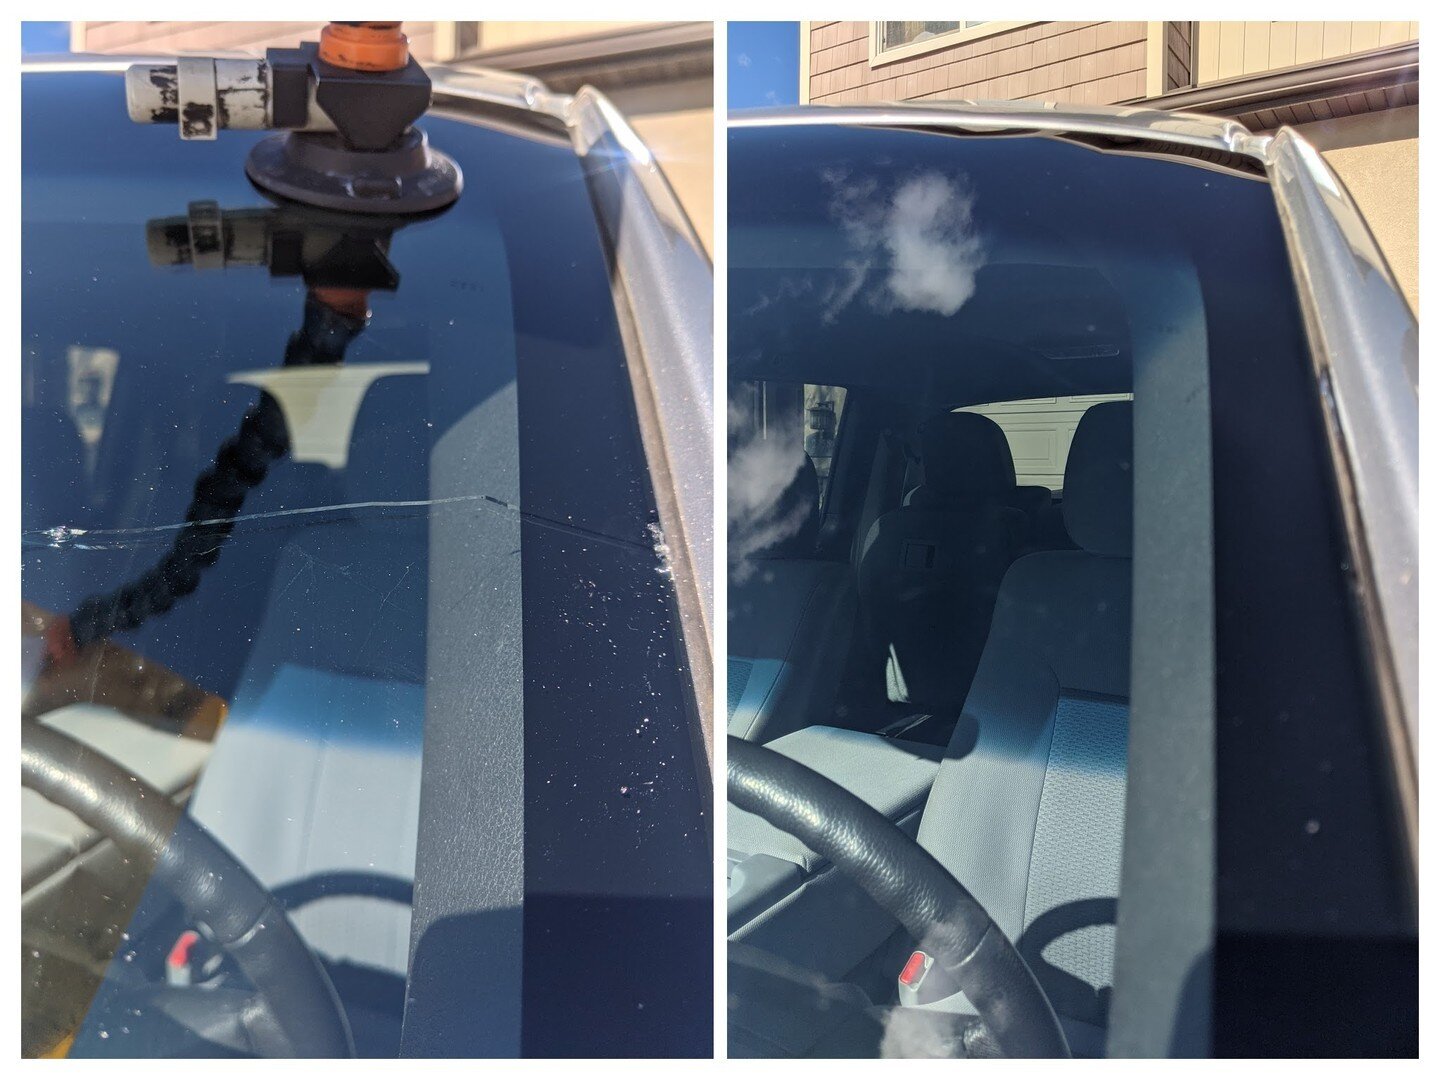 Mobile windshield repair. And the picture it's a 8-in crack. Before and after. Crack repair starting at 55 dollars. 
Service salt Lake City, Mill Creek, Murray Utah, Holladay Utah, South salt Lake, and some parts of Taylorsville and West valley but y